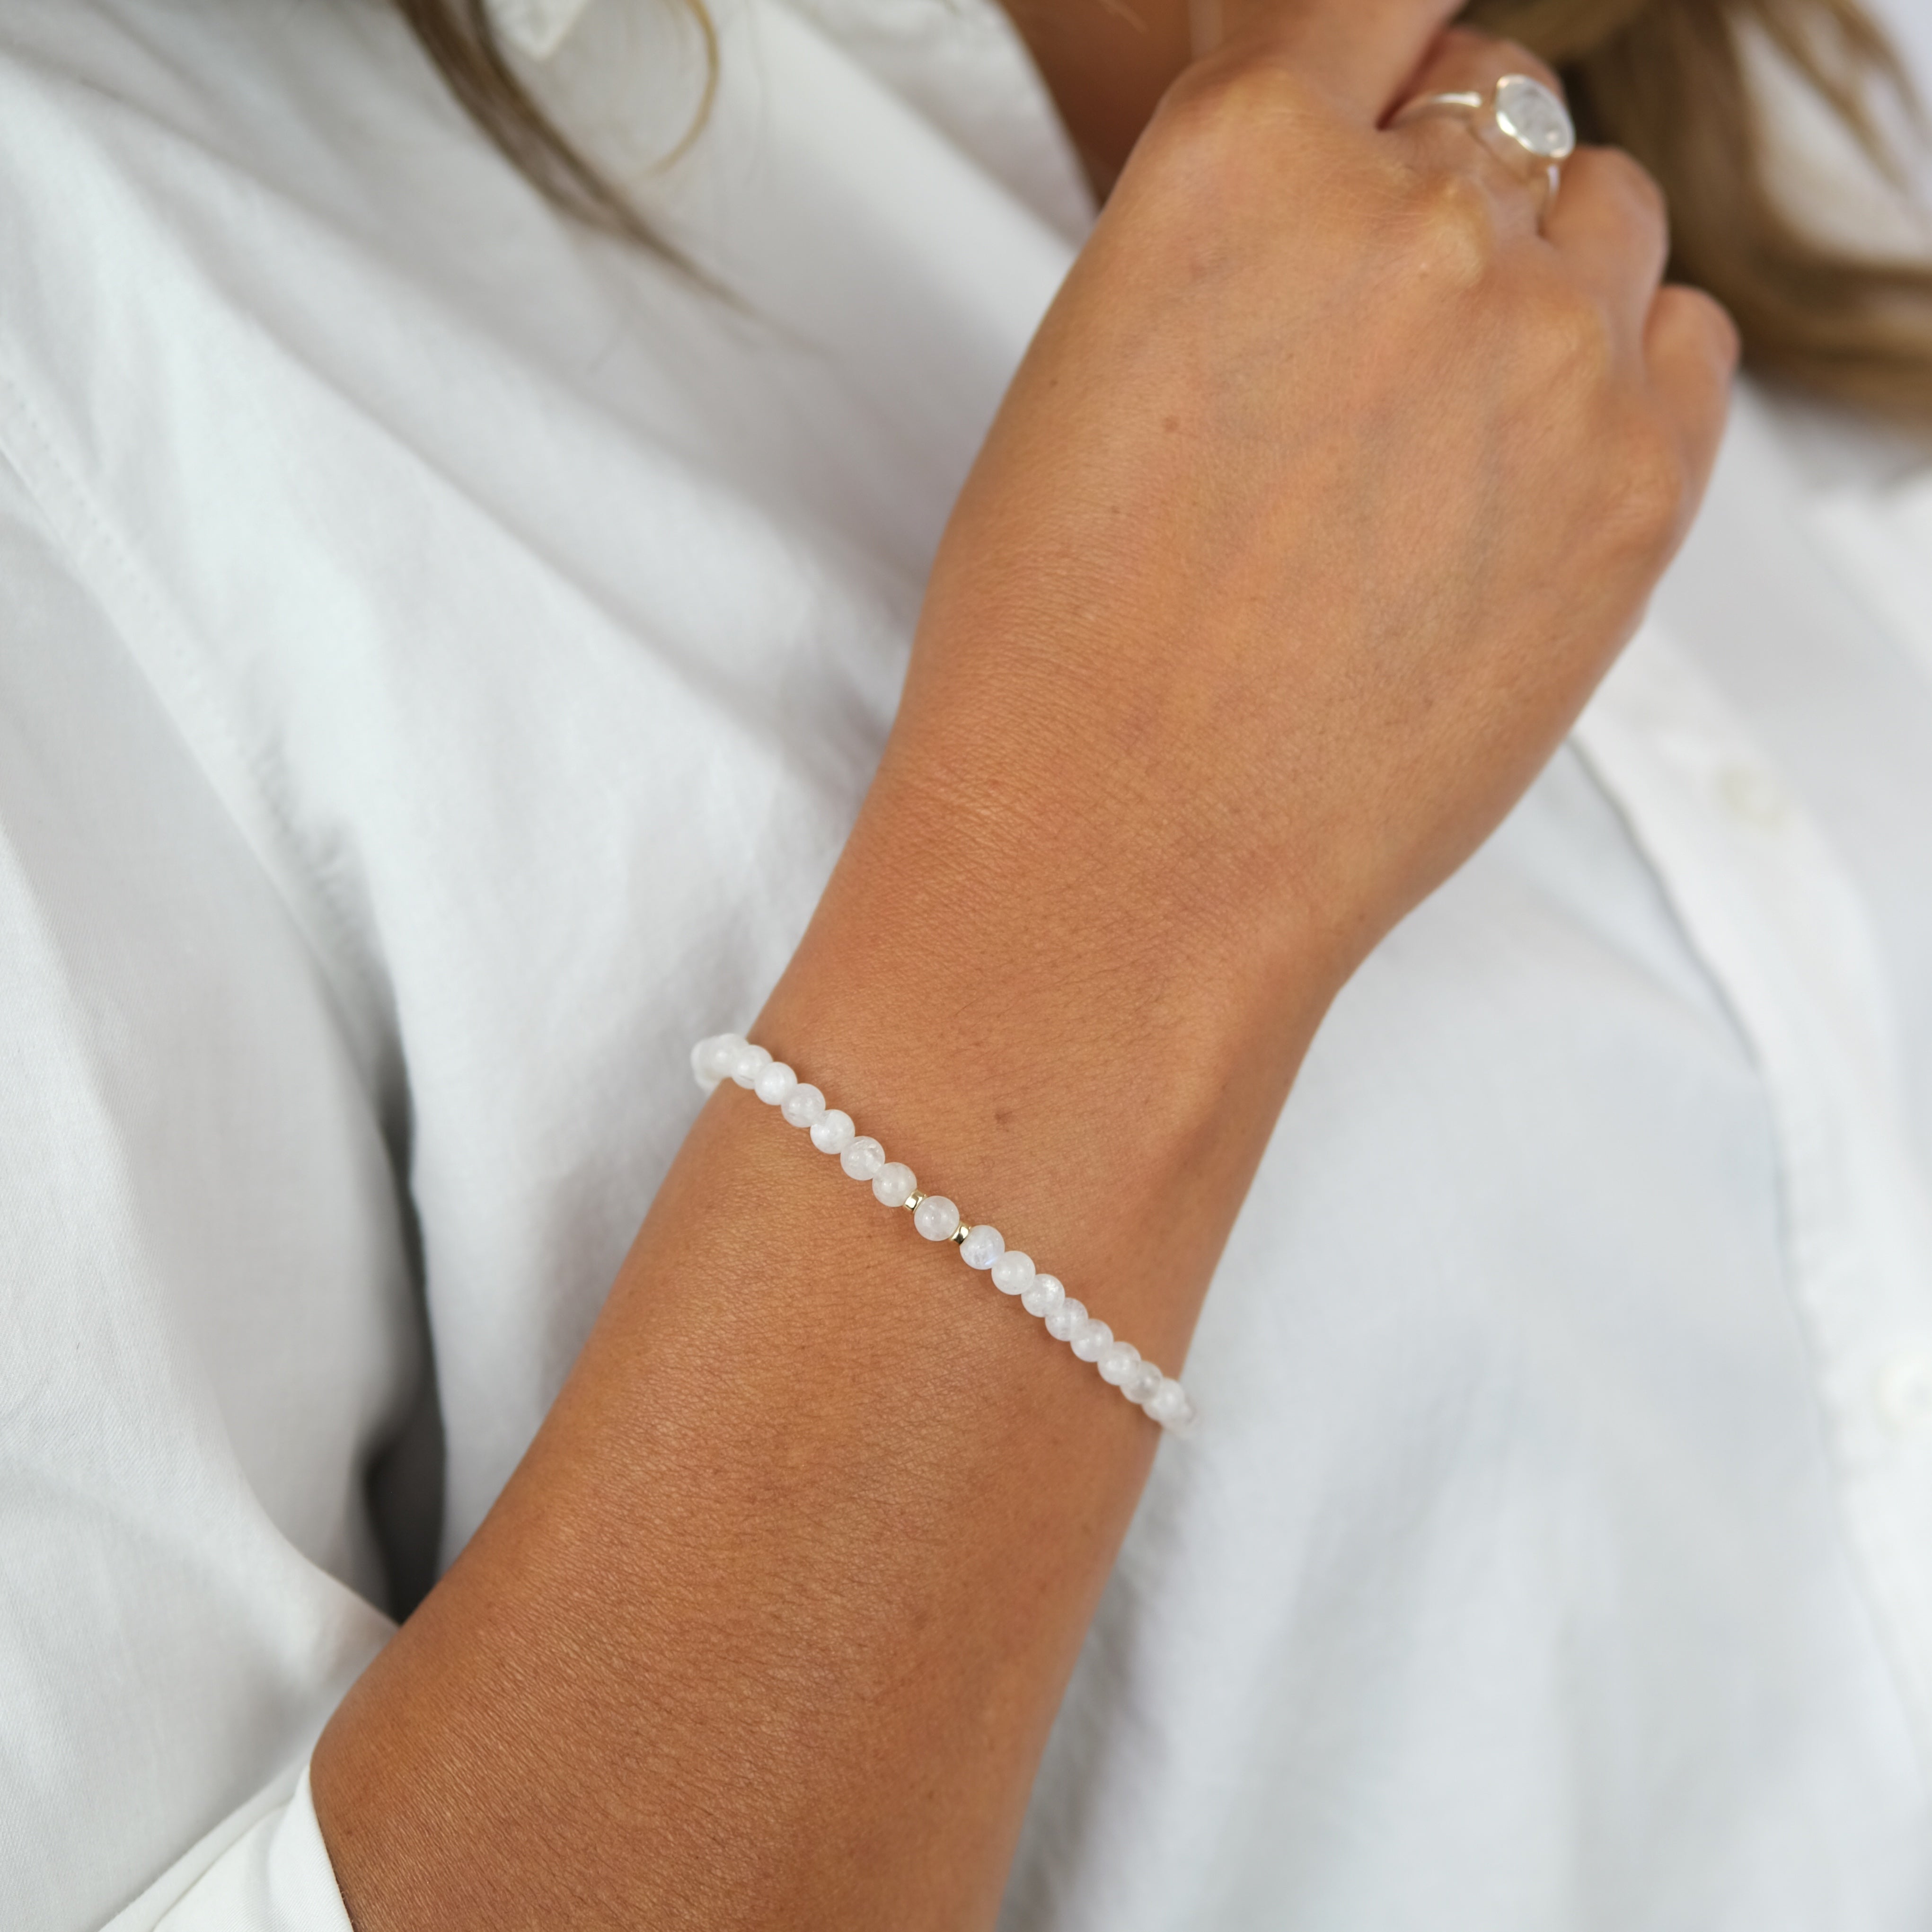 A model wearing A moonstone gemstone bracelet in 4mm beads with gold filled accessories